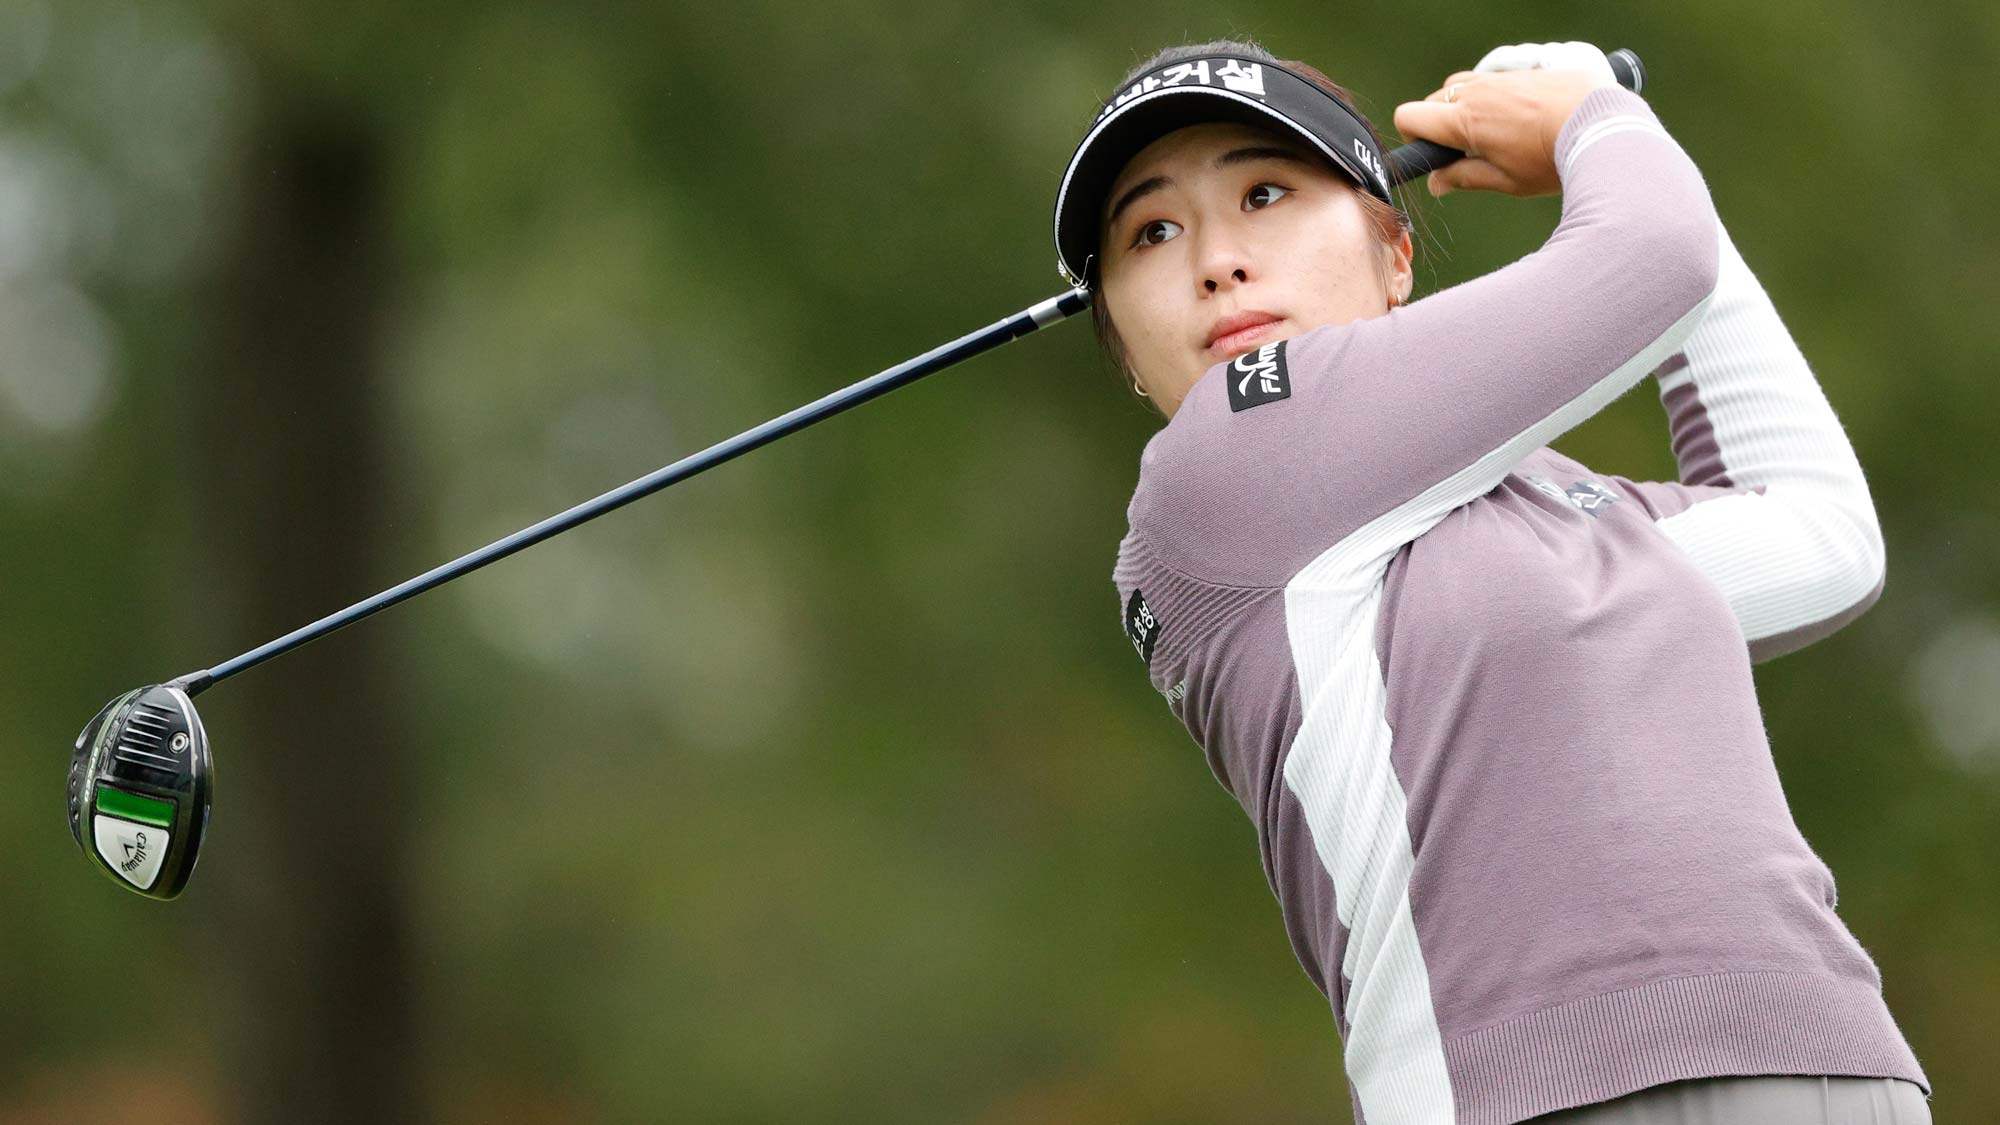 Jeongeun Lee6 of Korea hits their tee shot on the 2nd hole during the final...